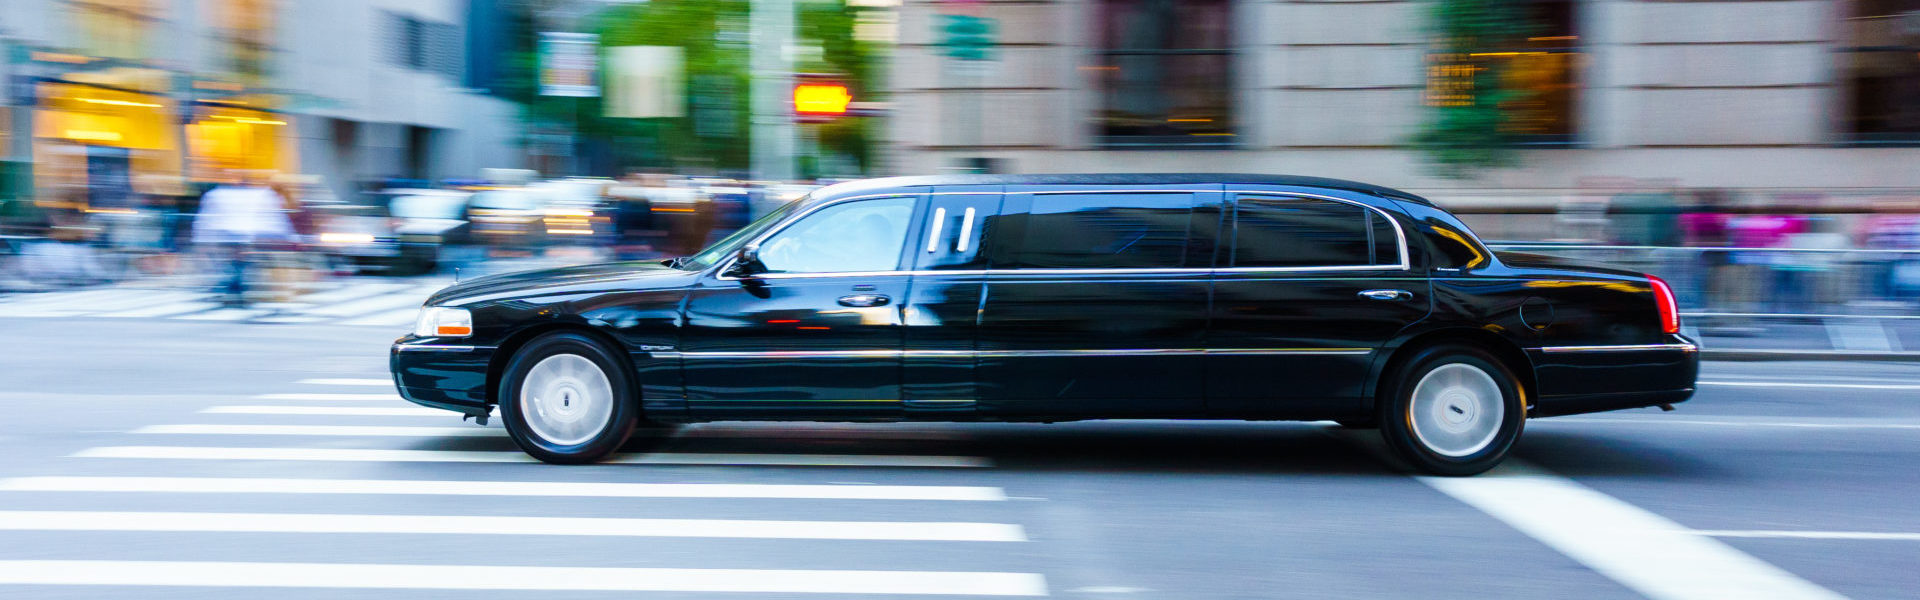 Livery insurance limo header, a black limousine driving in Manhattan, blurred background.